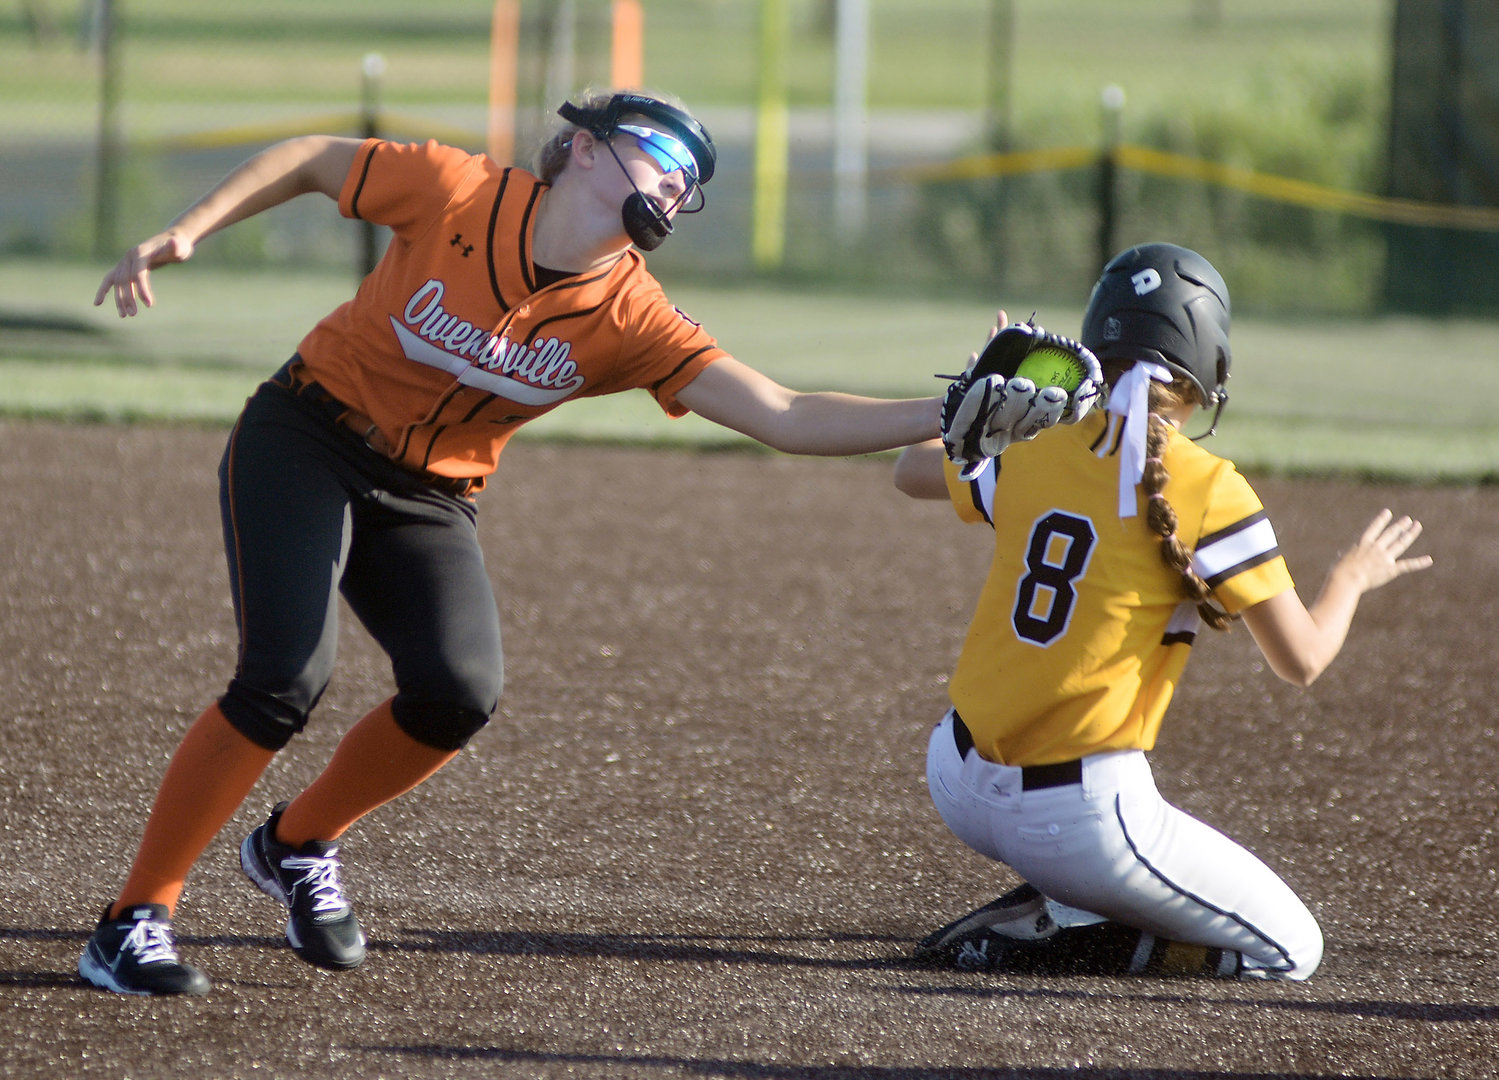 Anna Finley (above, left) narrowly misses tagging out Sullivan’s Grace Halmich stealing second base during home softball action at OHS Field between the Owensville Dutchgirls and Lady Eagles.